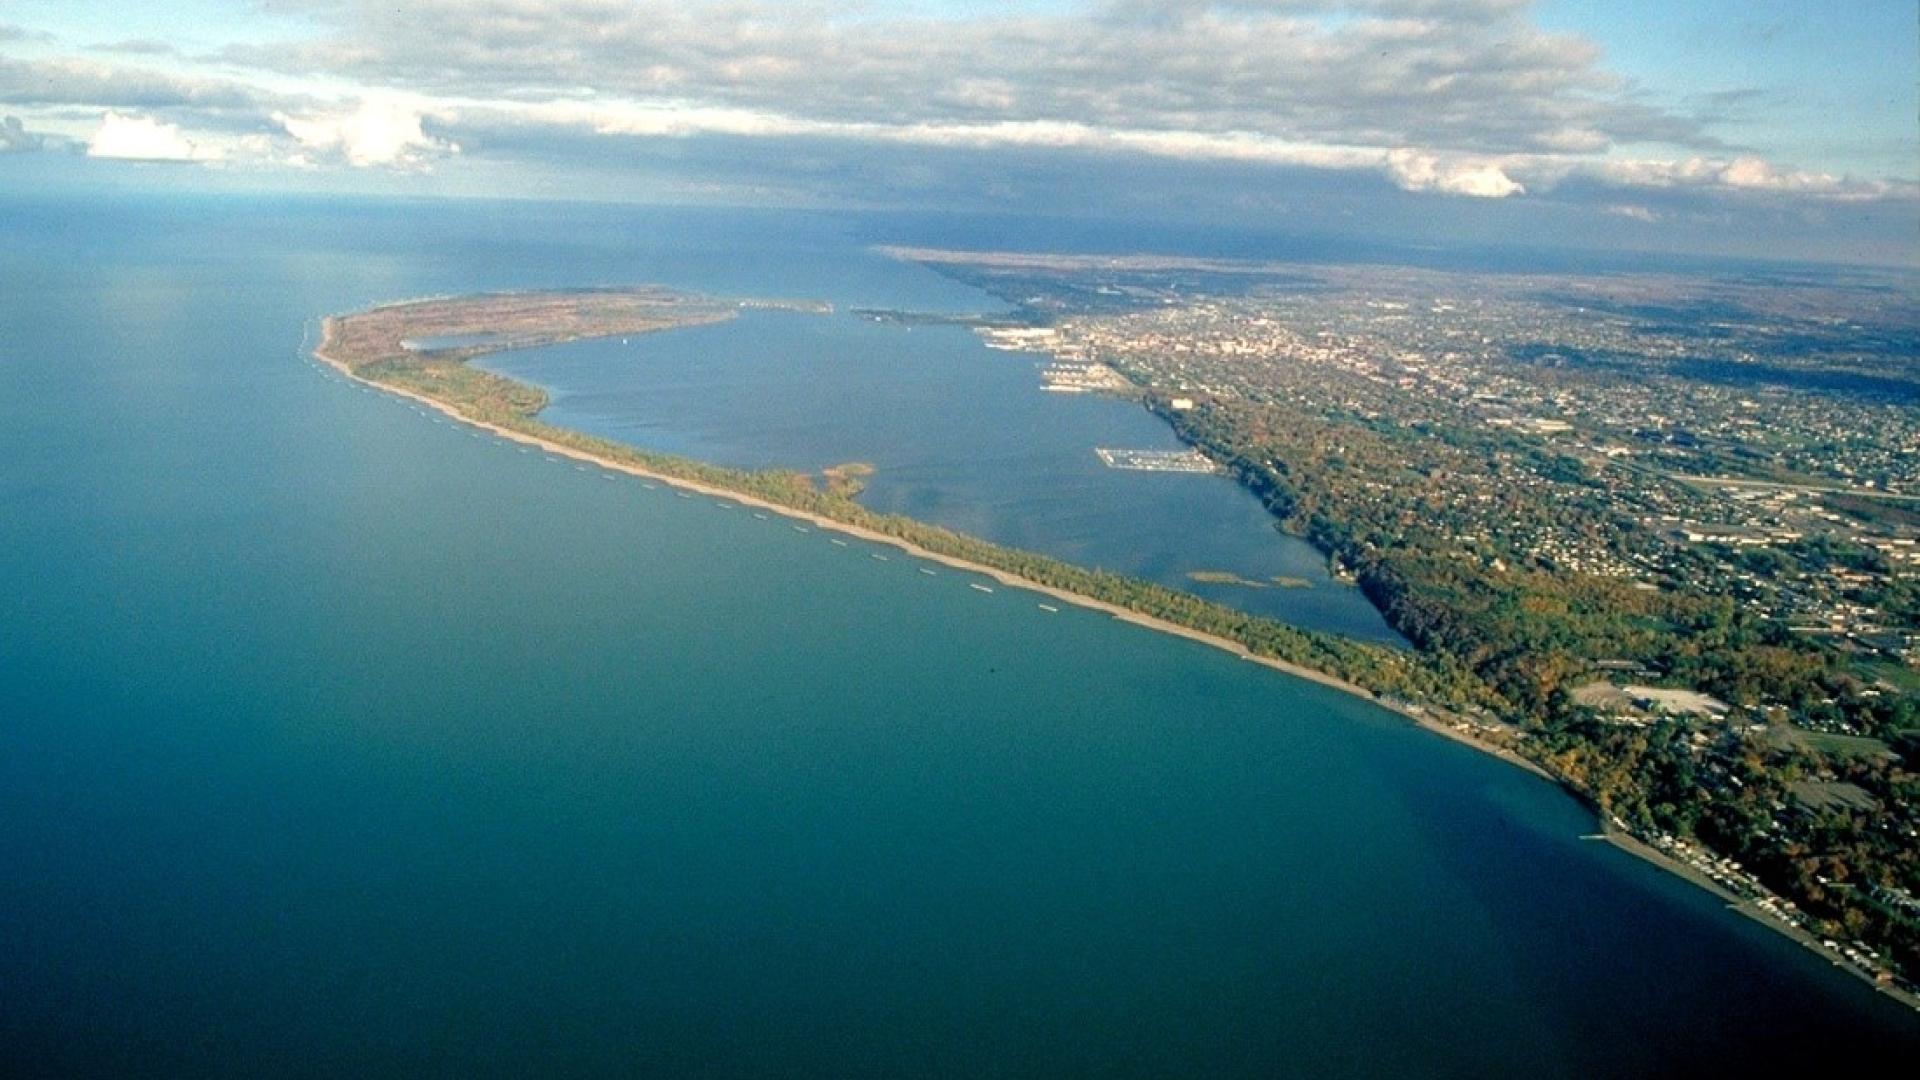 Water Matters - Aerial view of Presque Isle Bay on Lake Erie